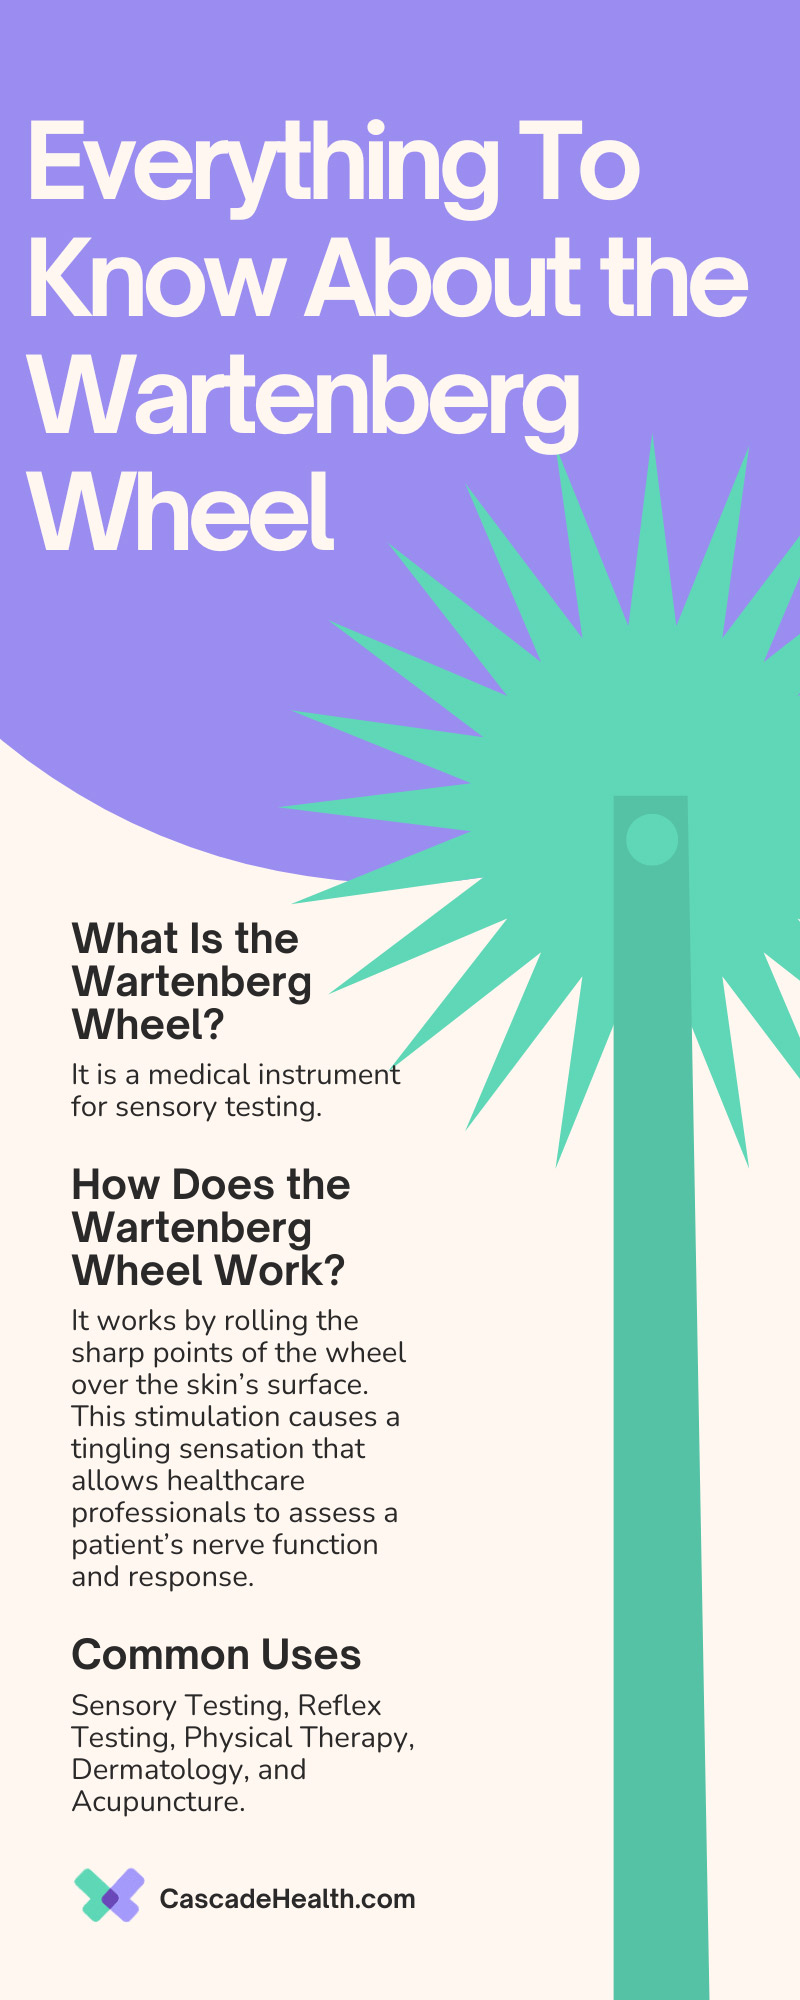 Everything To Know About the Wartenberg Wheel